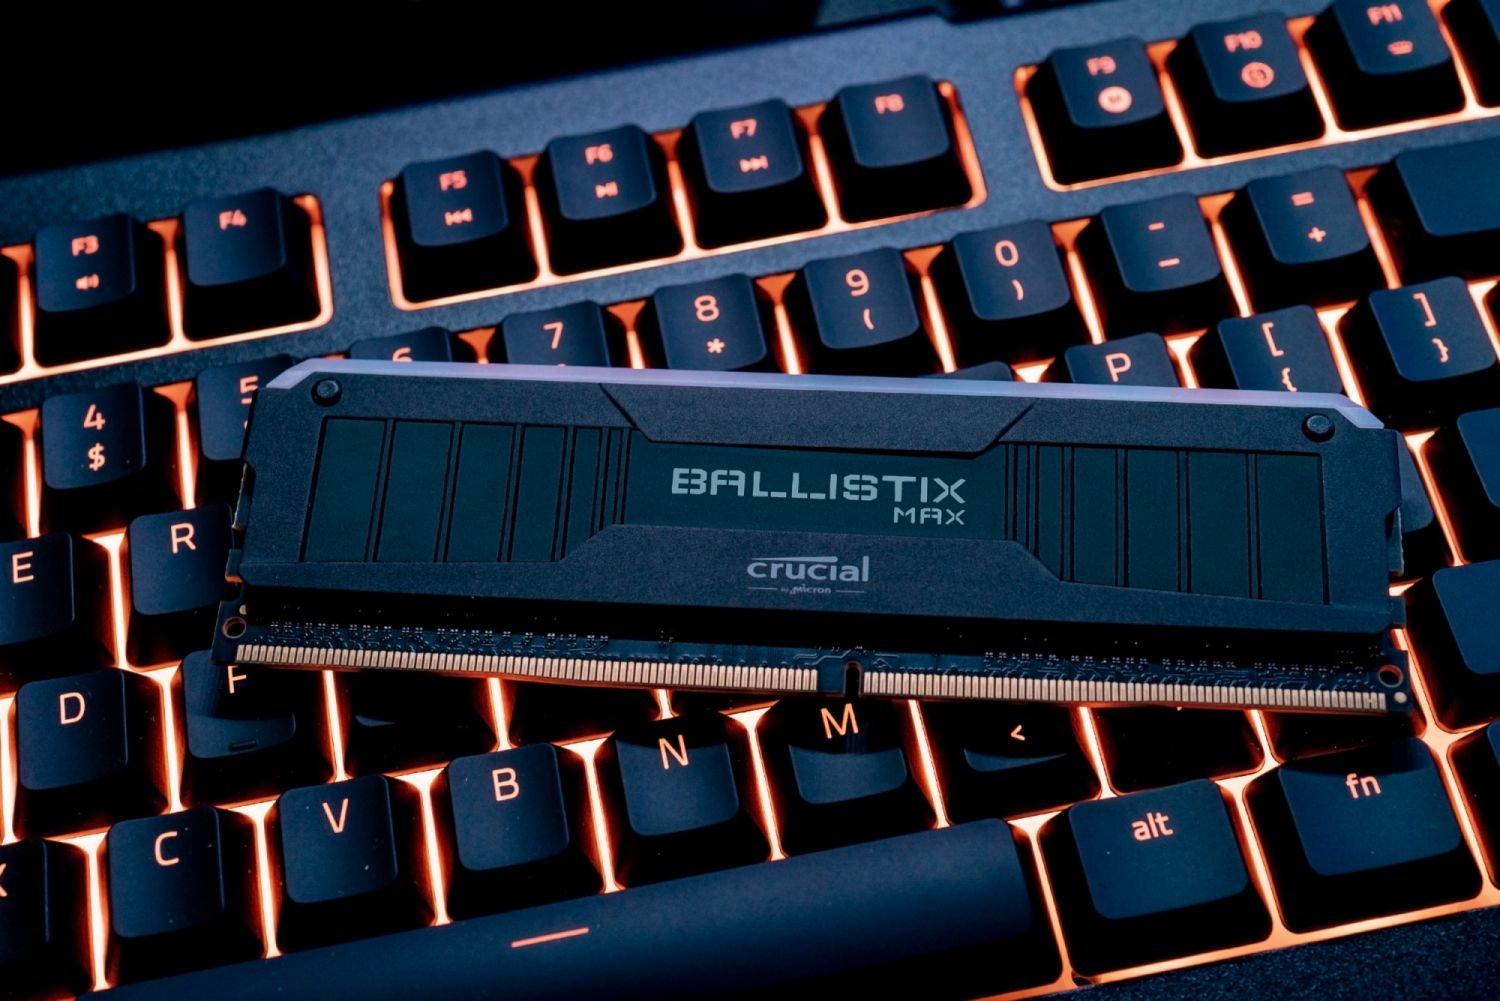 https://www.crucial.in/content/dam/crucial/dram-products/ballistix-max-udimm/images/in-use/Crucial-Ballistix-Extreme-Domination-MAX-Image.psd.transform/large-jpg/img.jpg